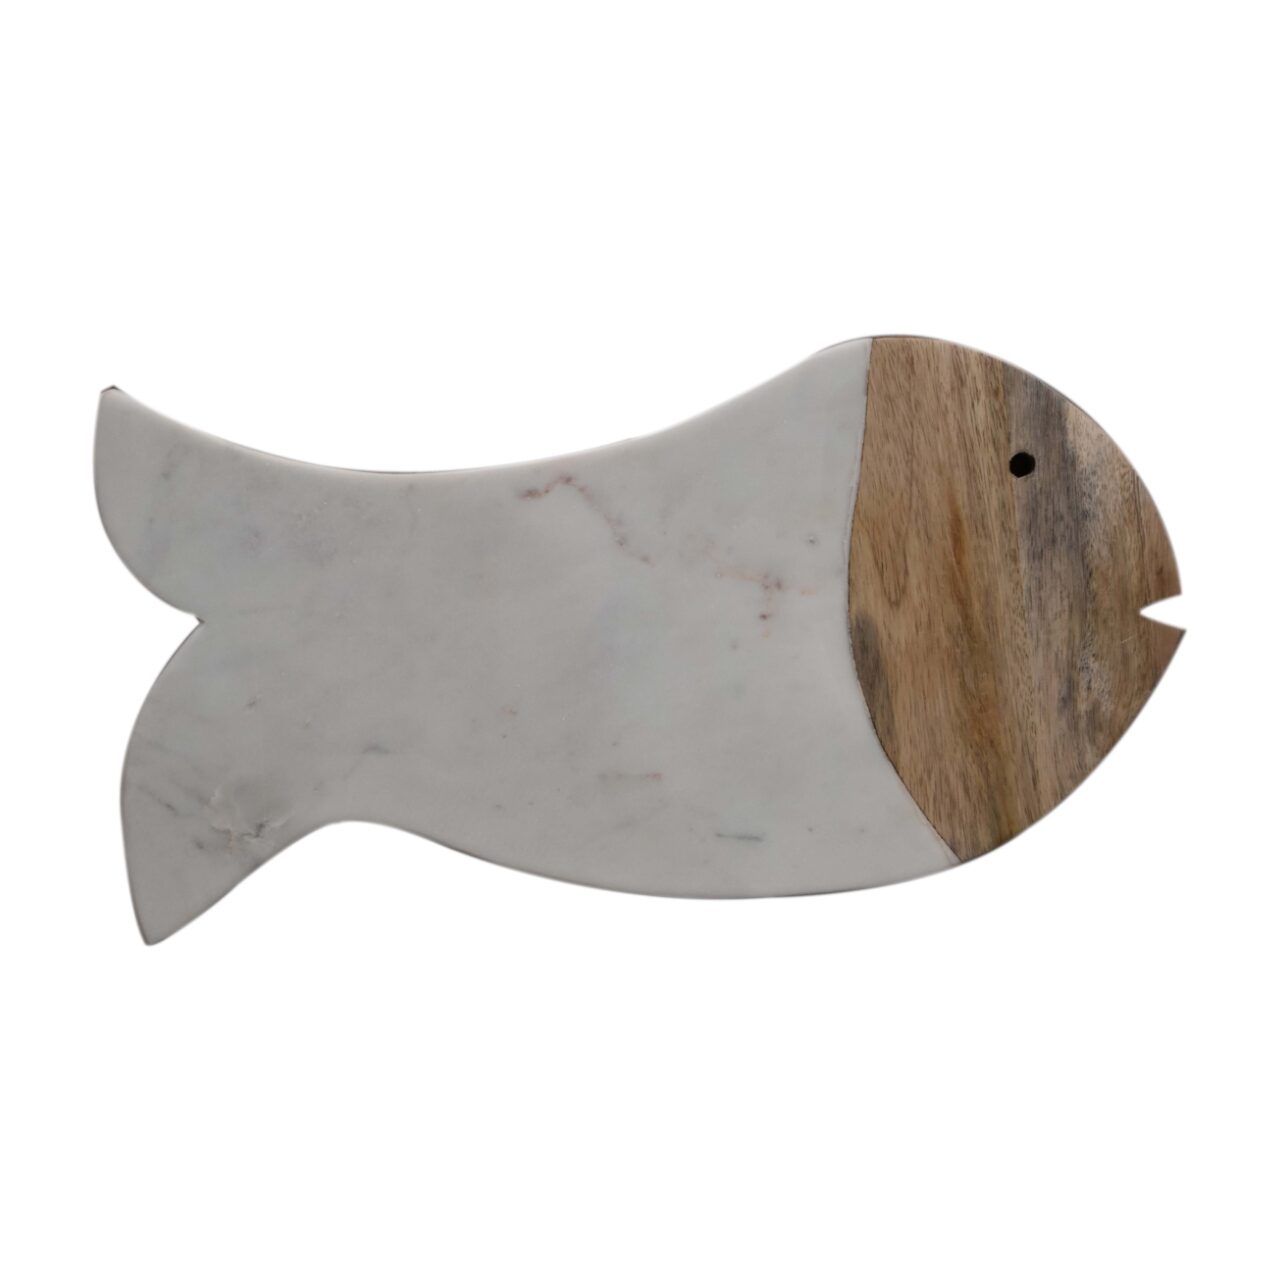 View Marble Fish Chopping Board information